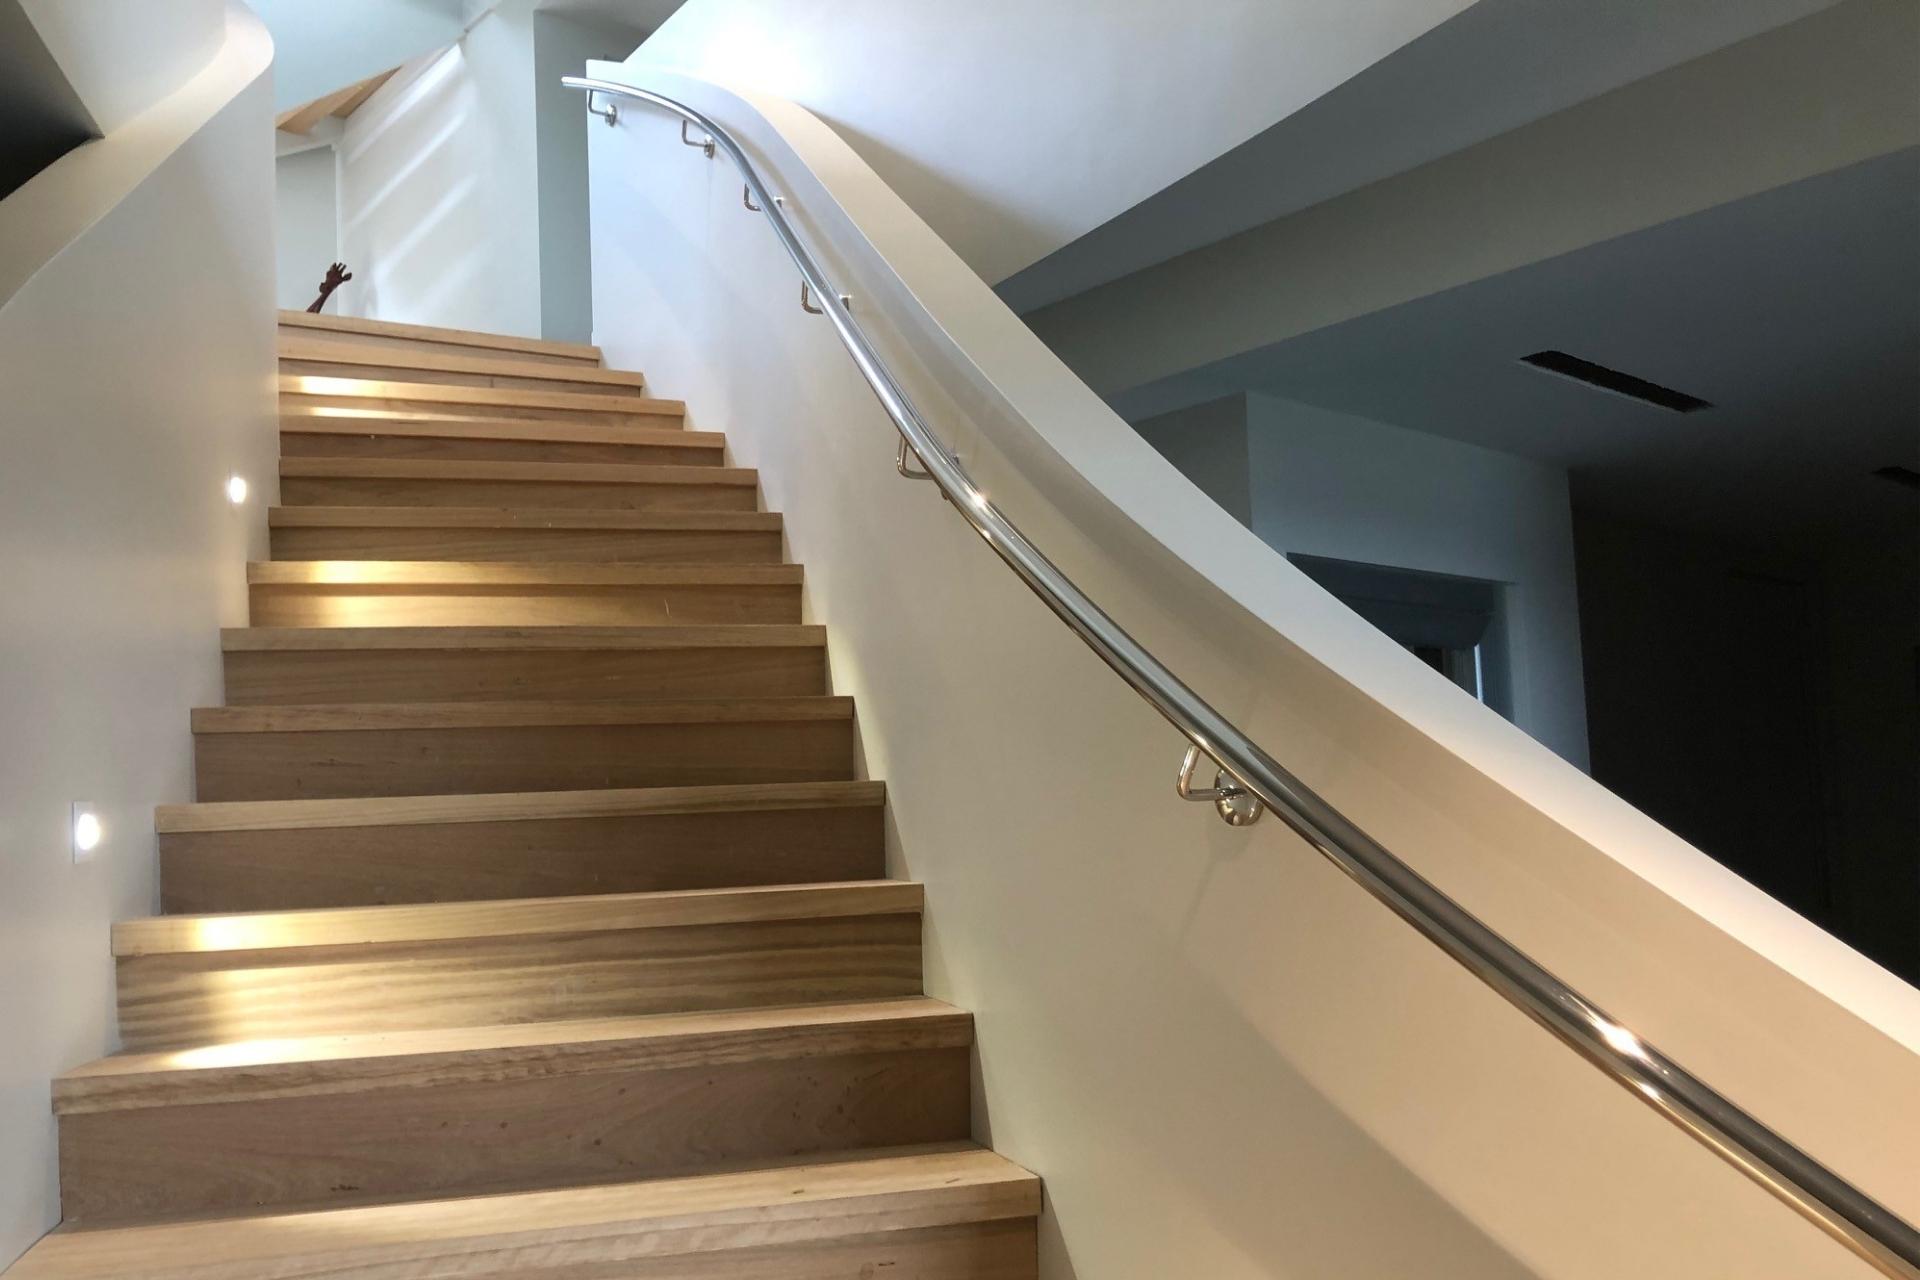 Services<br />
Handrails - Contemporary Stainless Steel